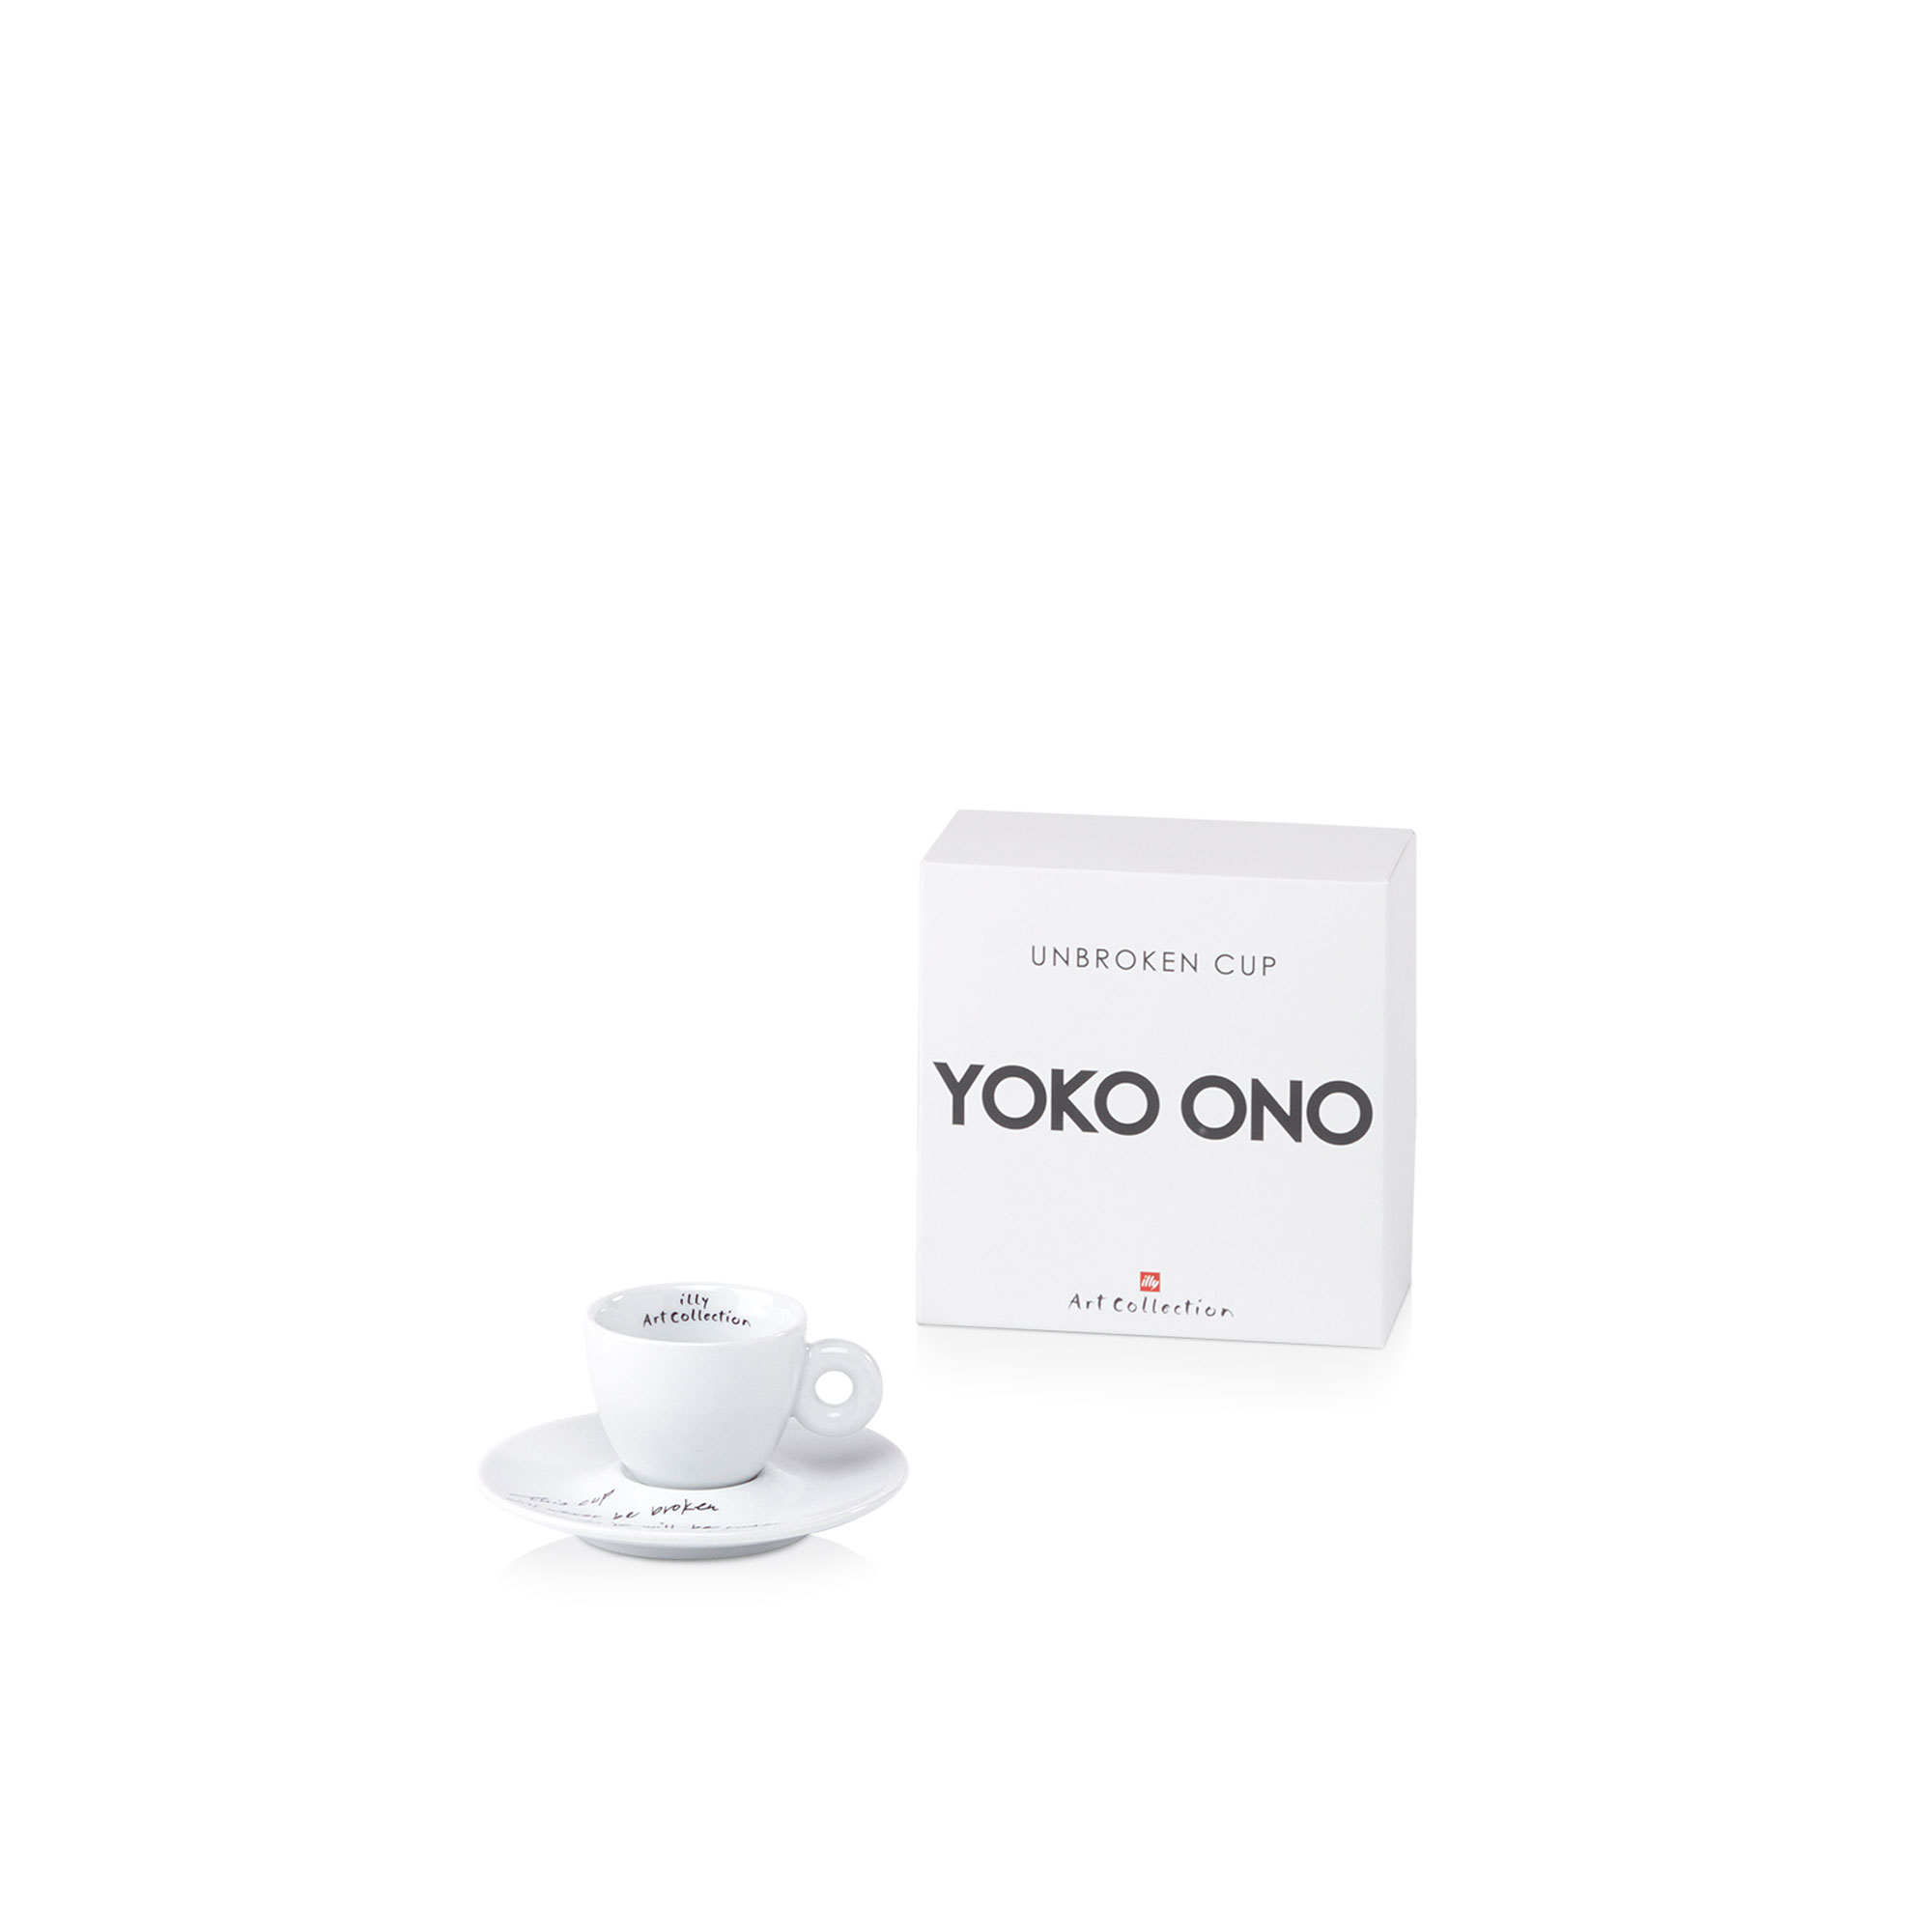 illy Yoko Ono UNBROKEN CUP Cup Collection